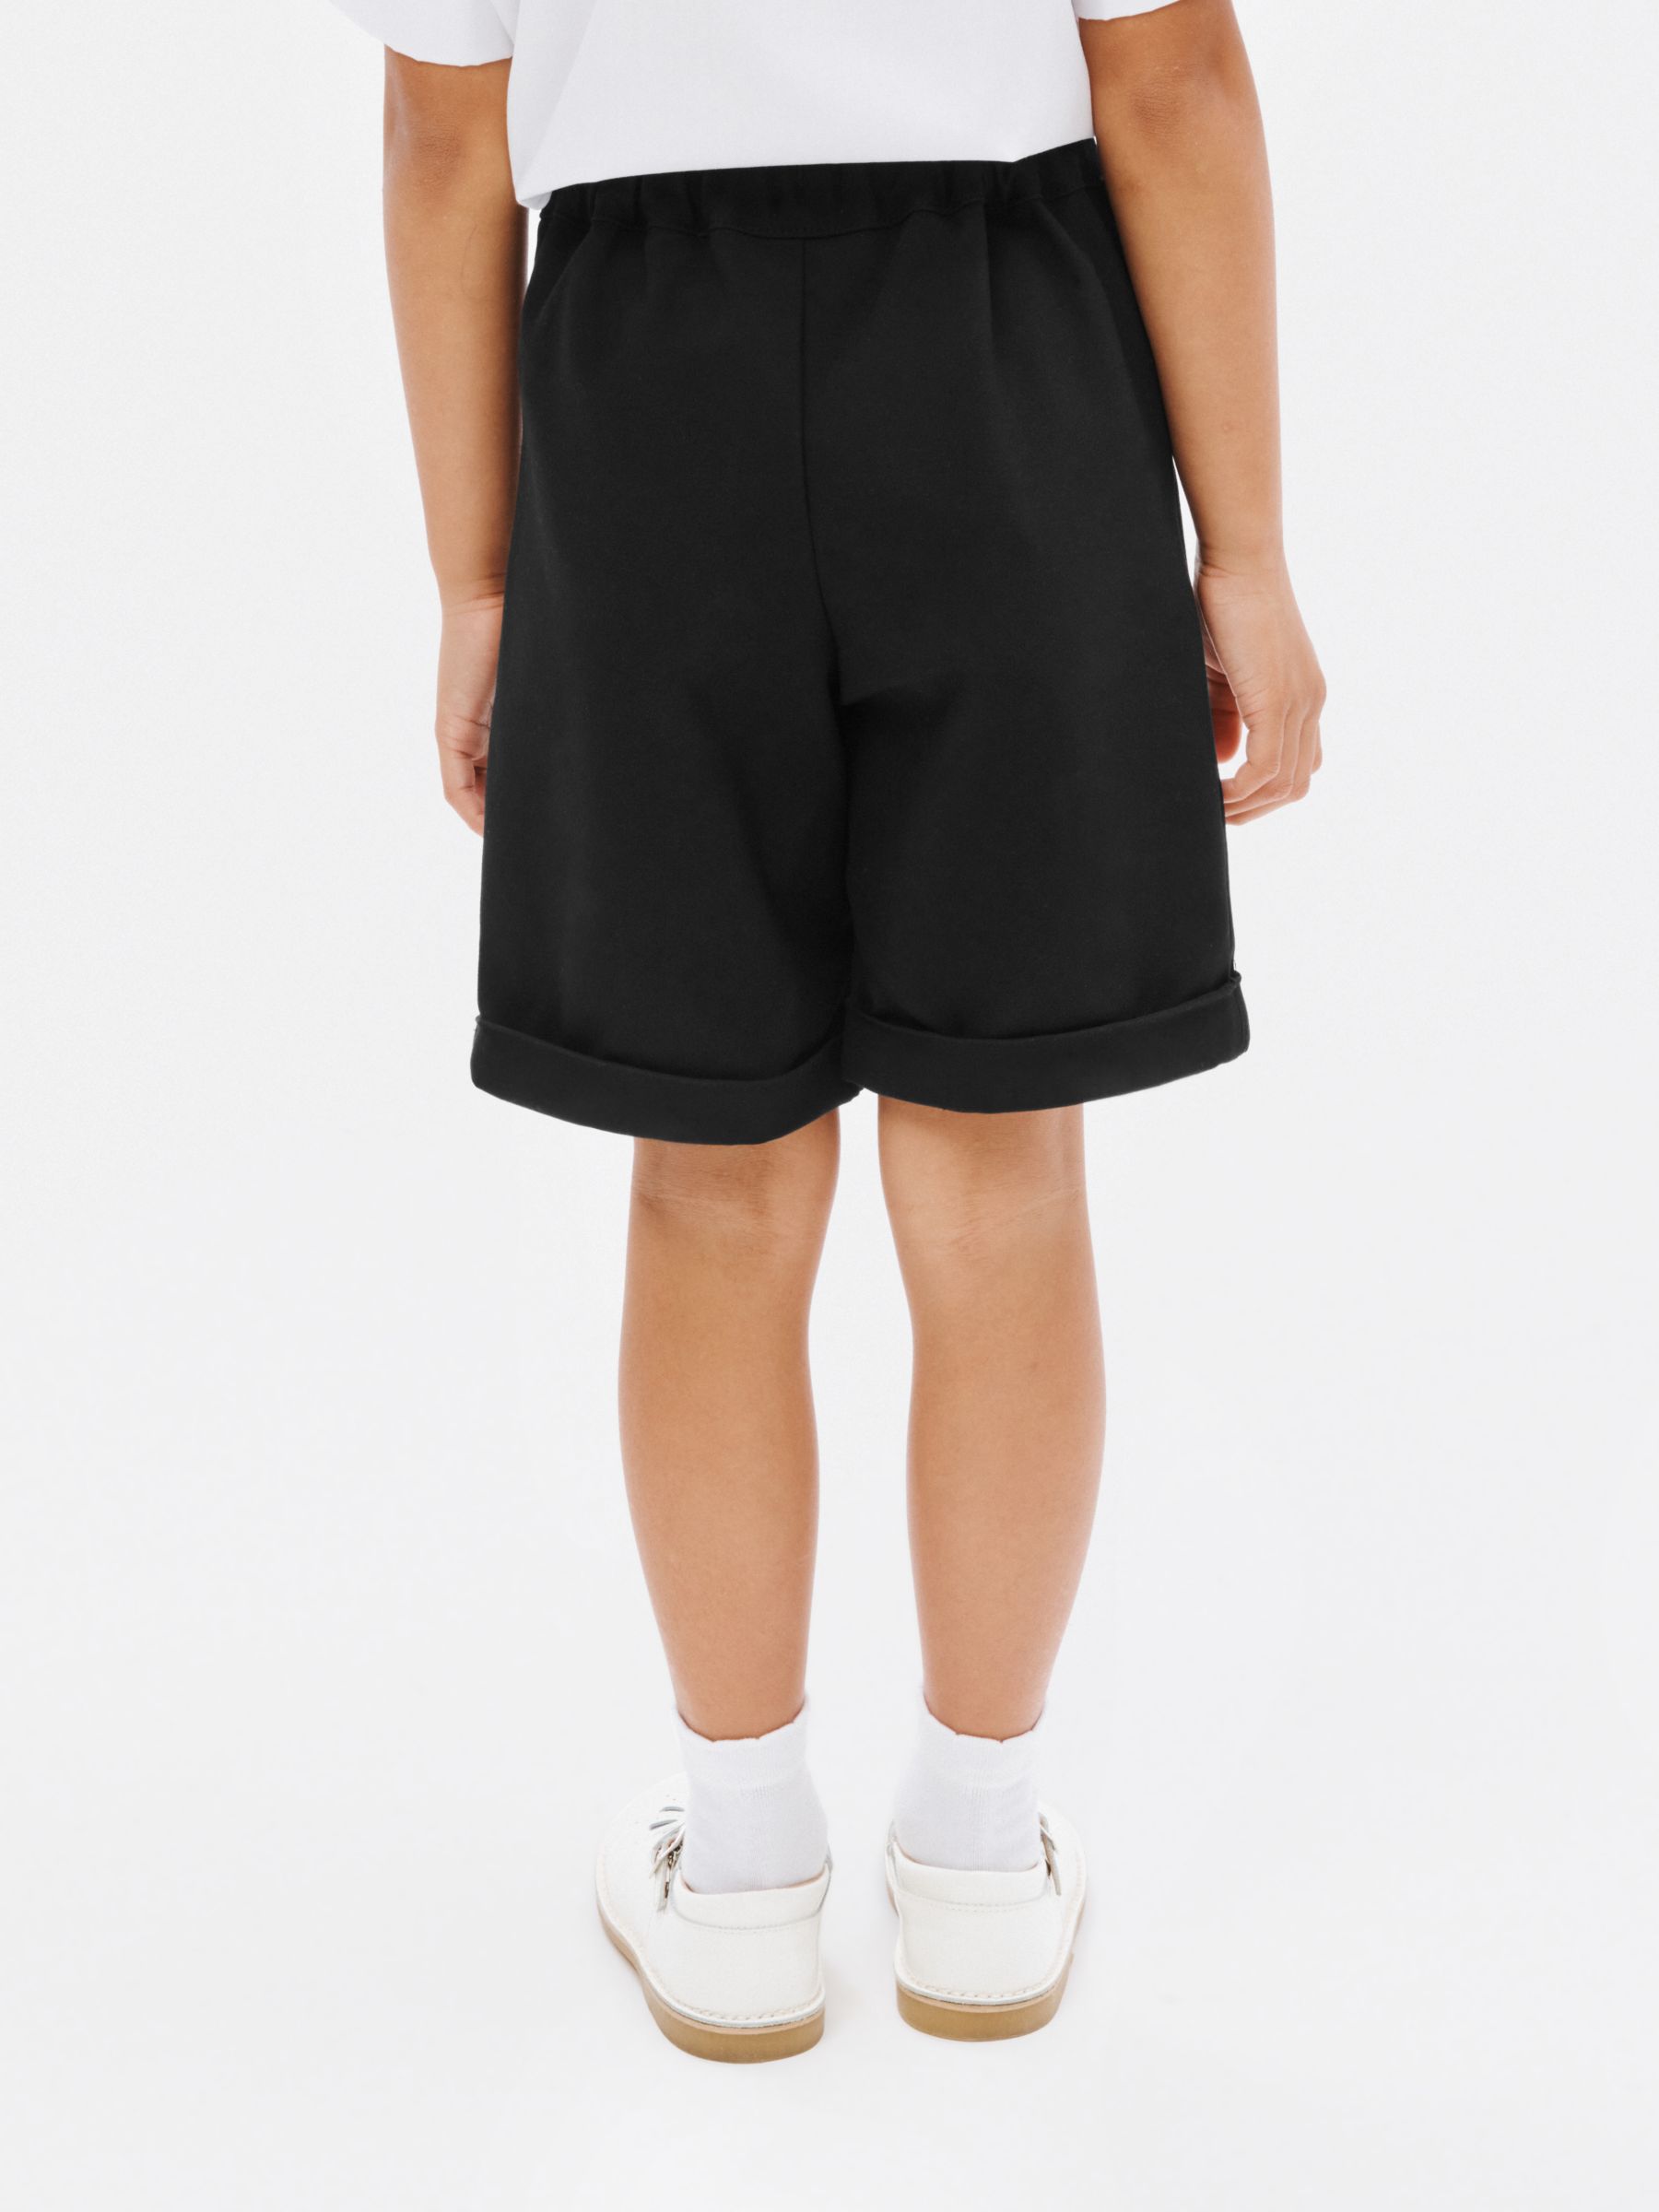 Tik Tok Wears Cotton Apple Cut Side Pocket Shorts for Girl's Pack of 1